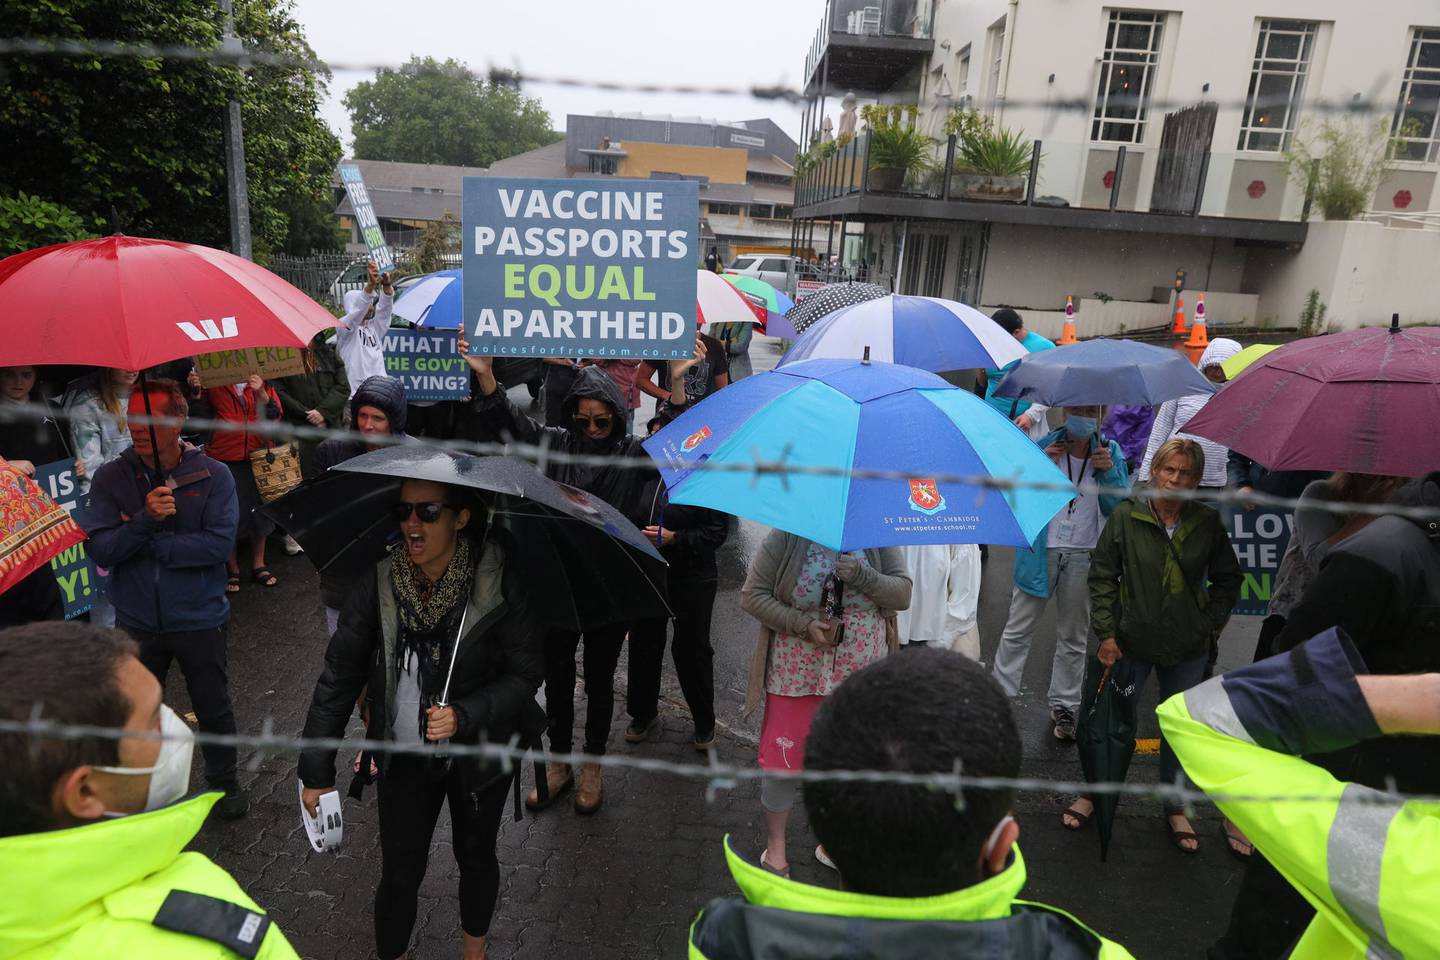 Protesters start chanting outside a sod turning event for the Waikato Regional Theatre in Hamilton CBD today that Prime Minister Jacinda Ardern is attending. Photo / Mike Scott